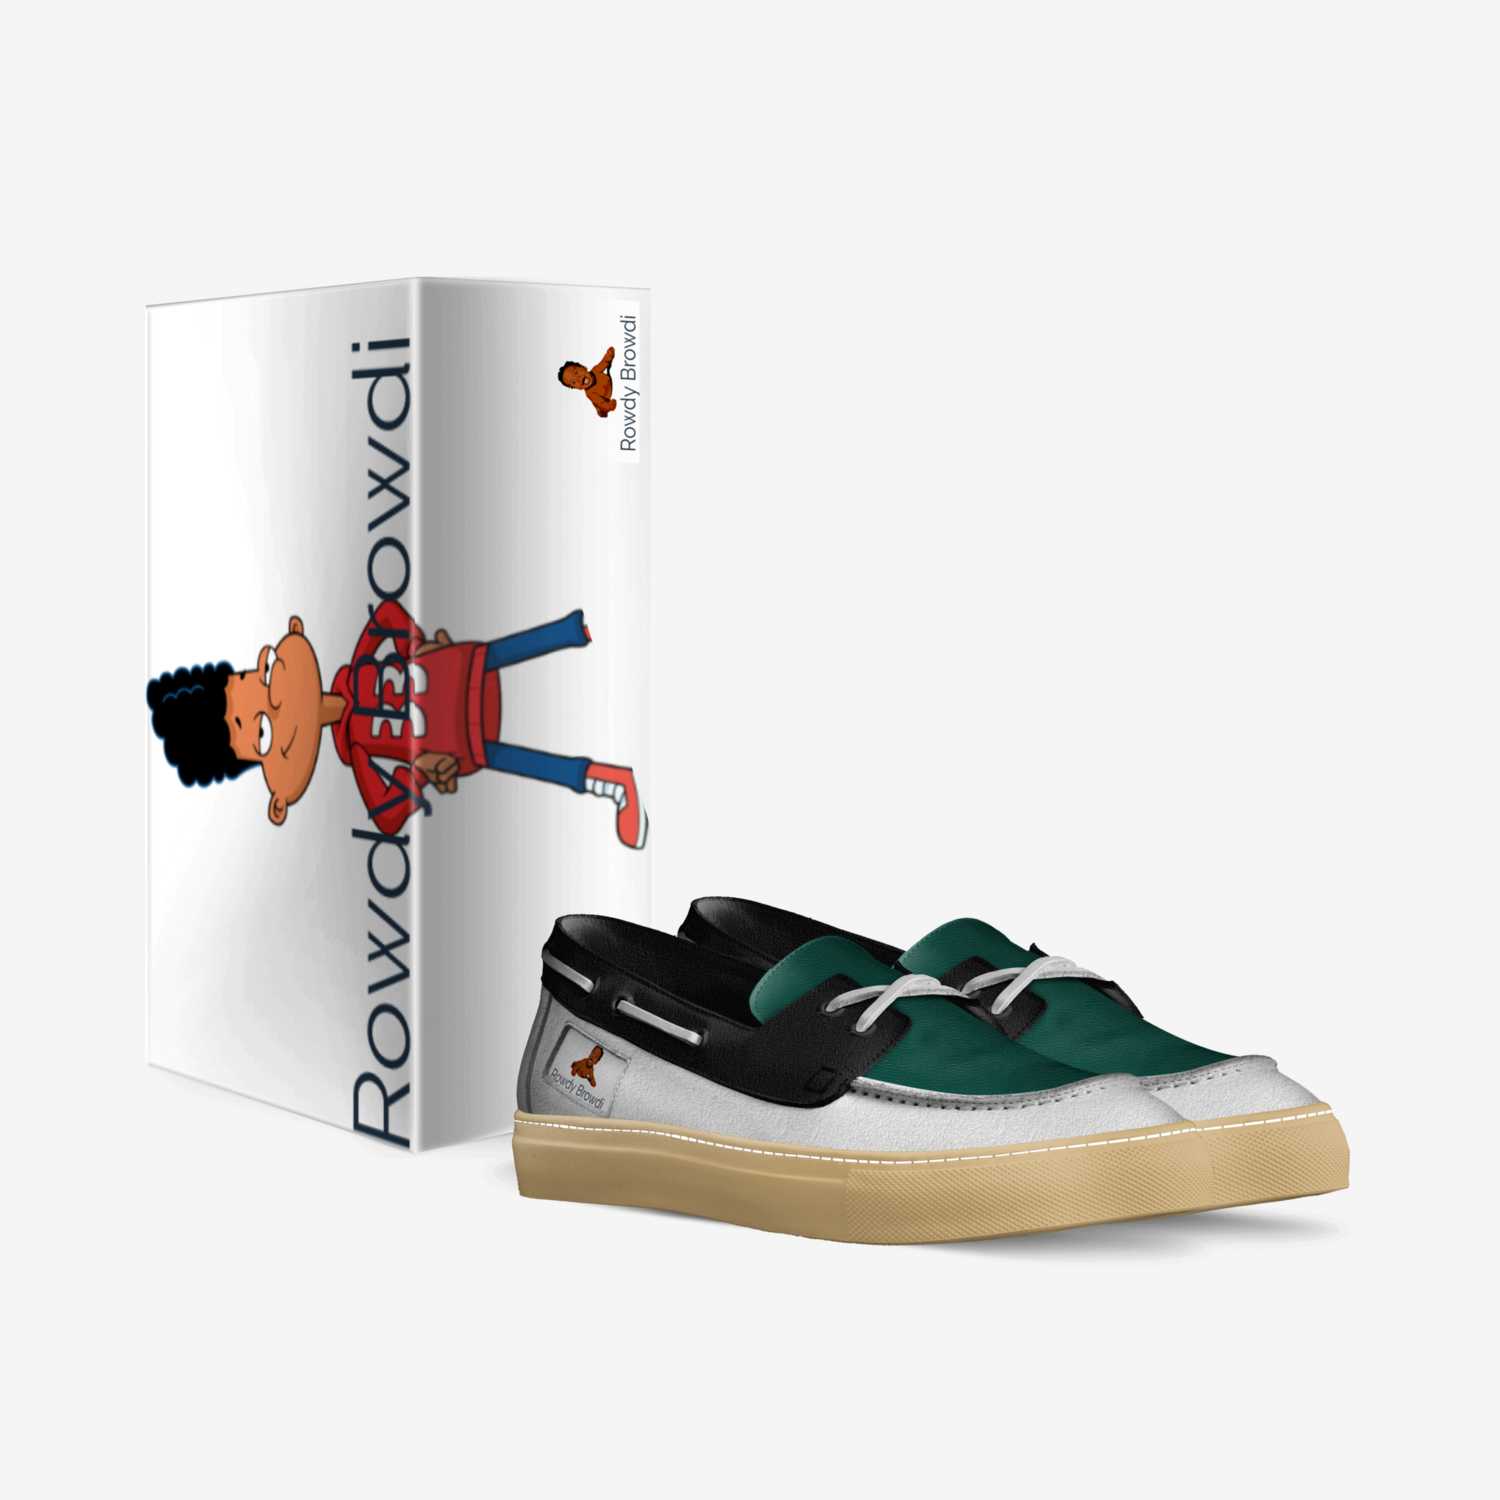 Rowdy Browdi custom made in Italy shoes by Janyia Corp | Box view